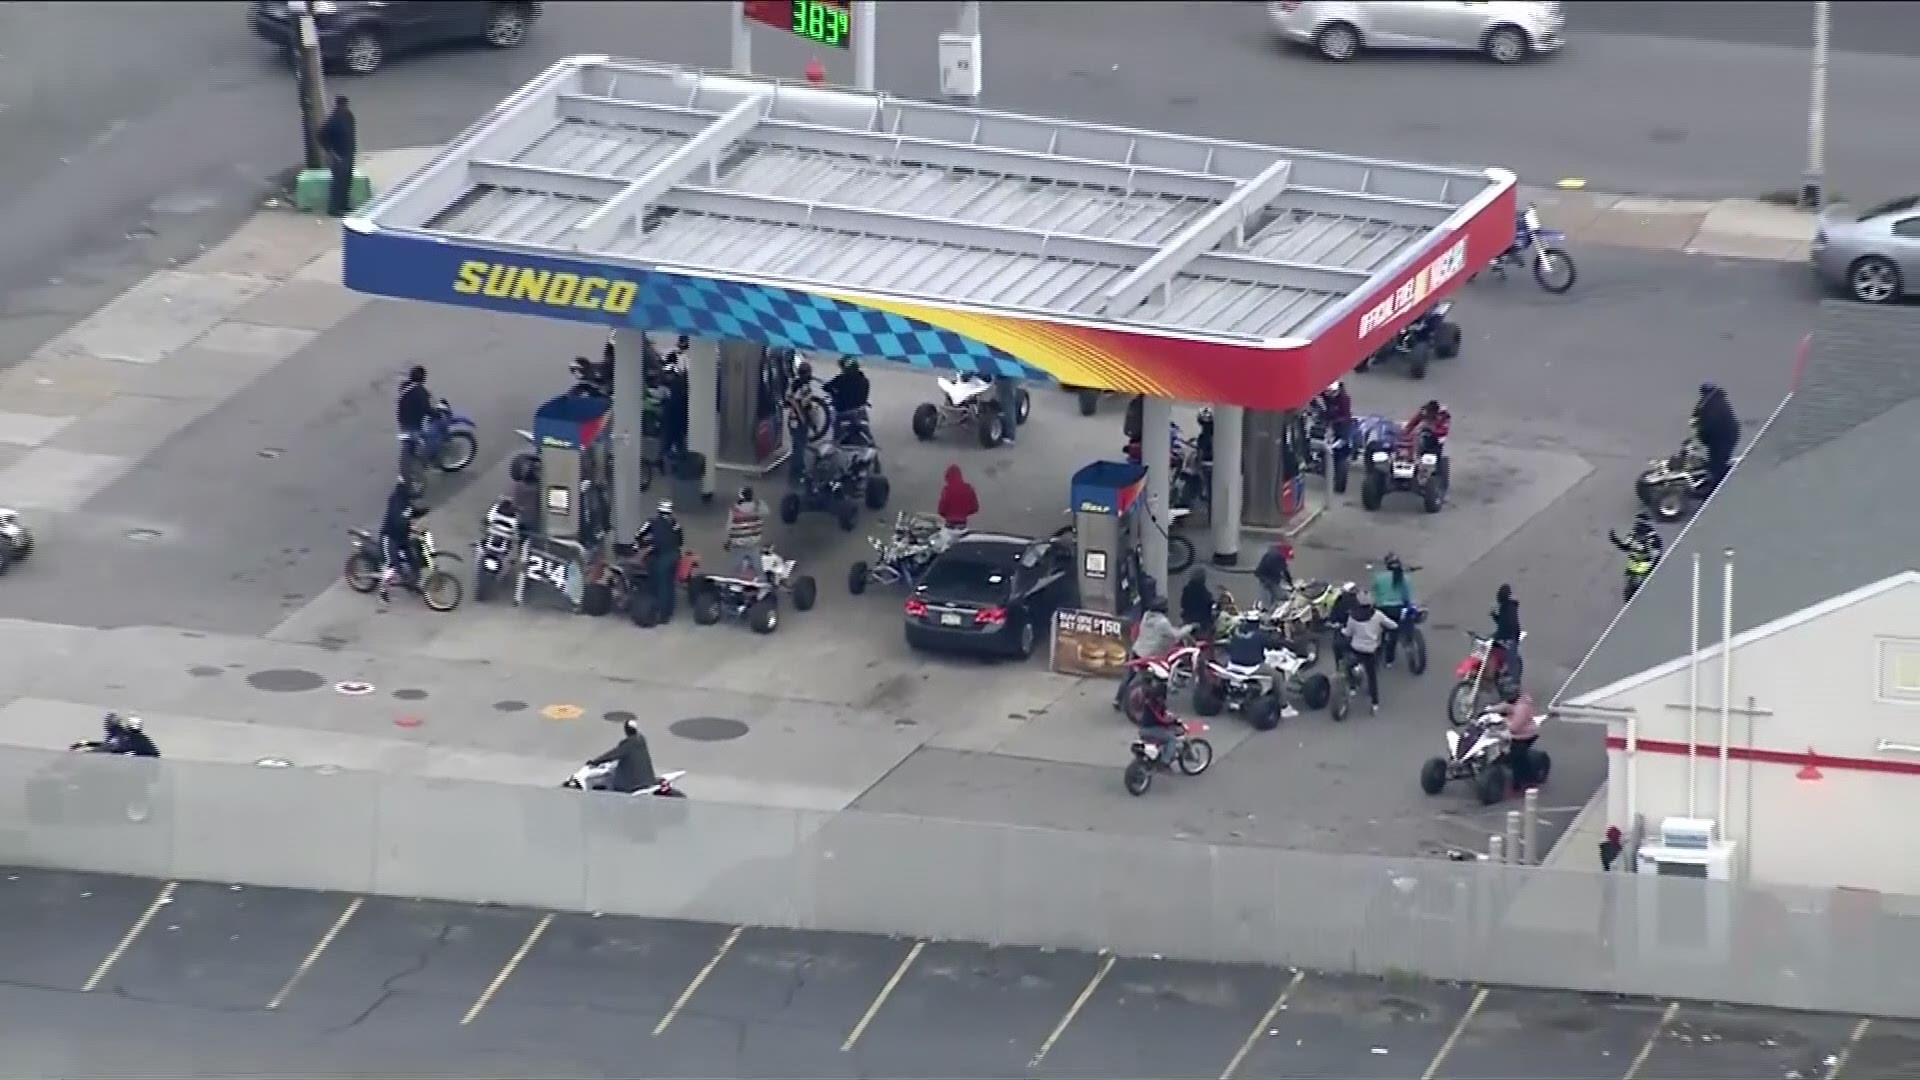 Hundreds of motorbikes and ATVs on Philadelphia streets on Sunday left Philadelphia Police scrambling to keep tabs on the developing situation.